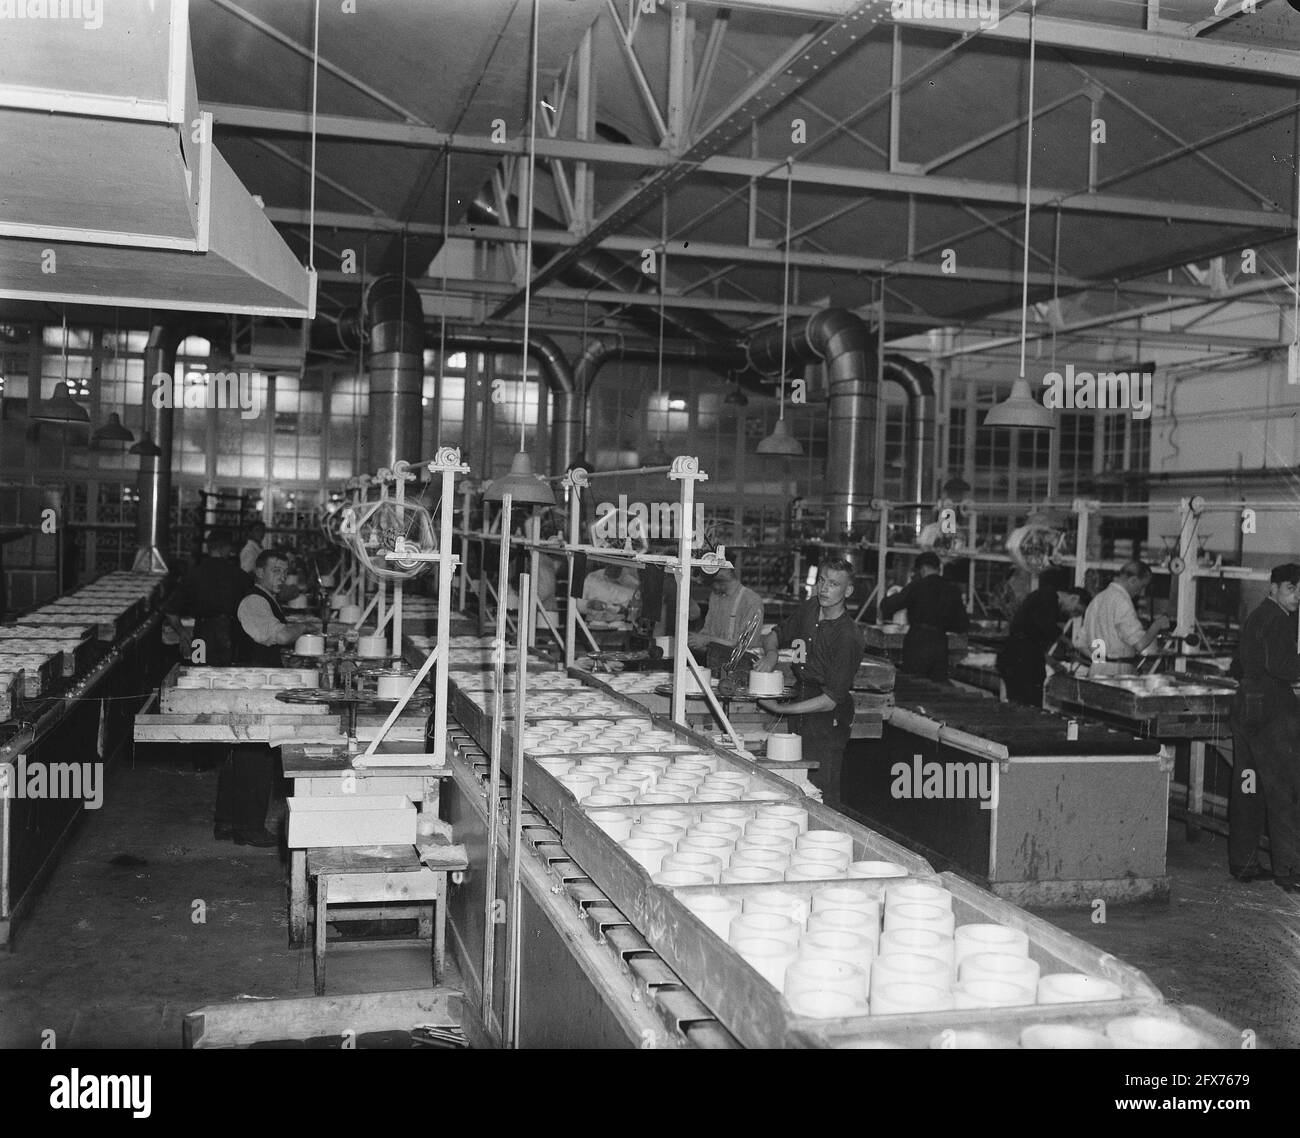 In the war-ravaged city of Arnhem people are working hard to build up the artificial silk industry. This product, so important to Dutch textile supply, is being manufactured here at the A.K.U. (Arnhem Artificial Silk Union), May 28, 1947, industry, textile industry, The Netherlands, 20th century press agency photo, news to remember, documentary, historic photography 1945-1990, visual stories, human history of the Twentieth Century, capturing moments in time Stock Photo